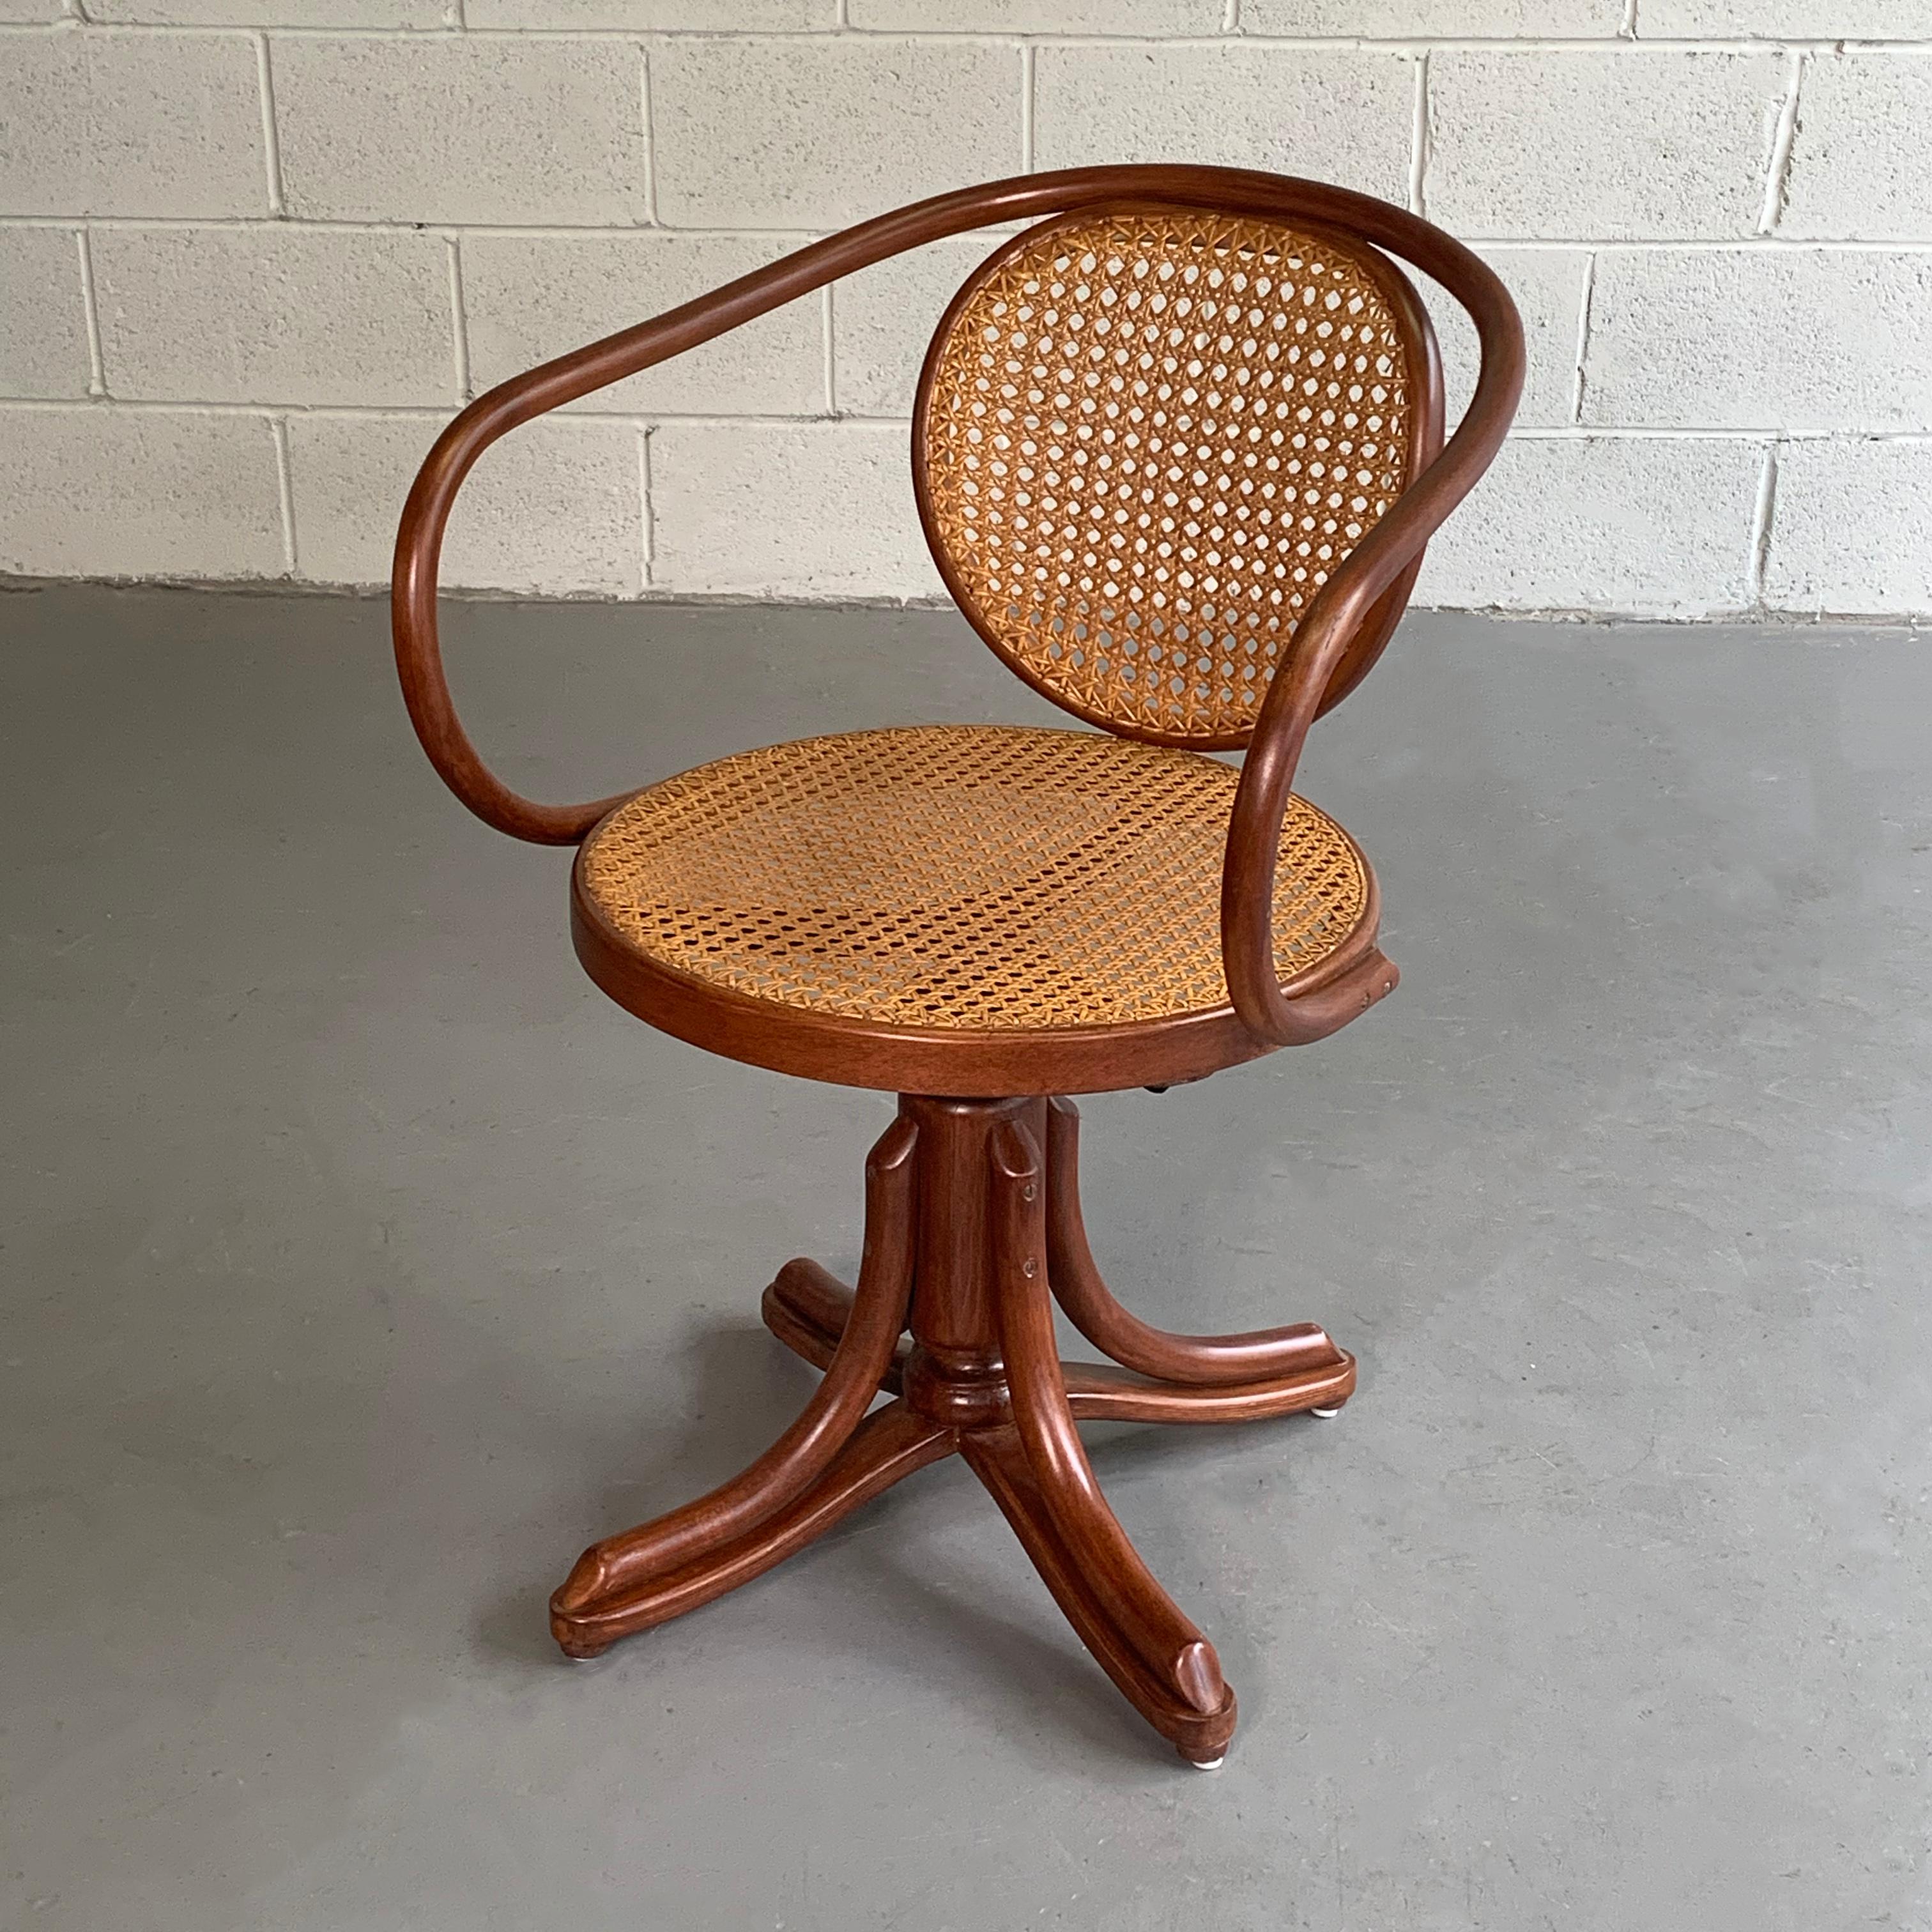 Antique, sculptural, bentwood, swivel armchair by Thonet for ZPM Radomsko features it's original, woven rattan back and seat that is height adjustable from 18 - 22 inches.